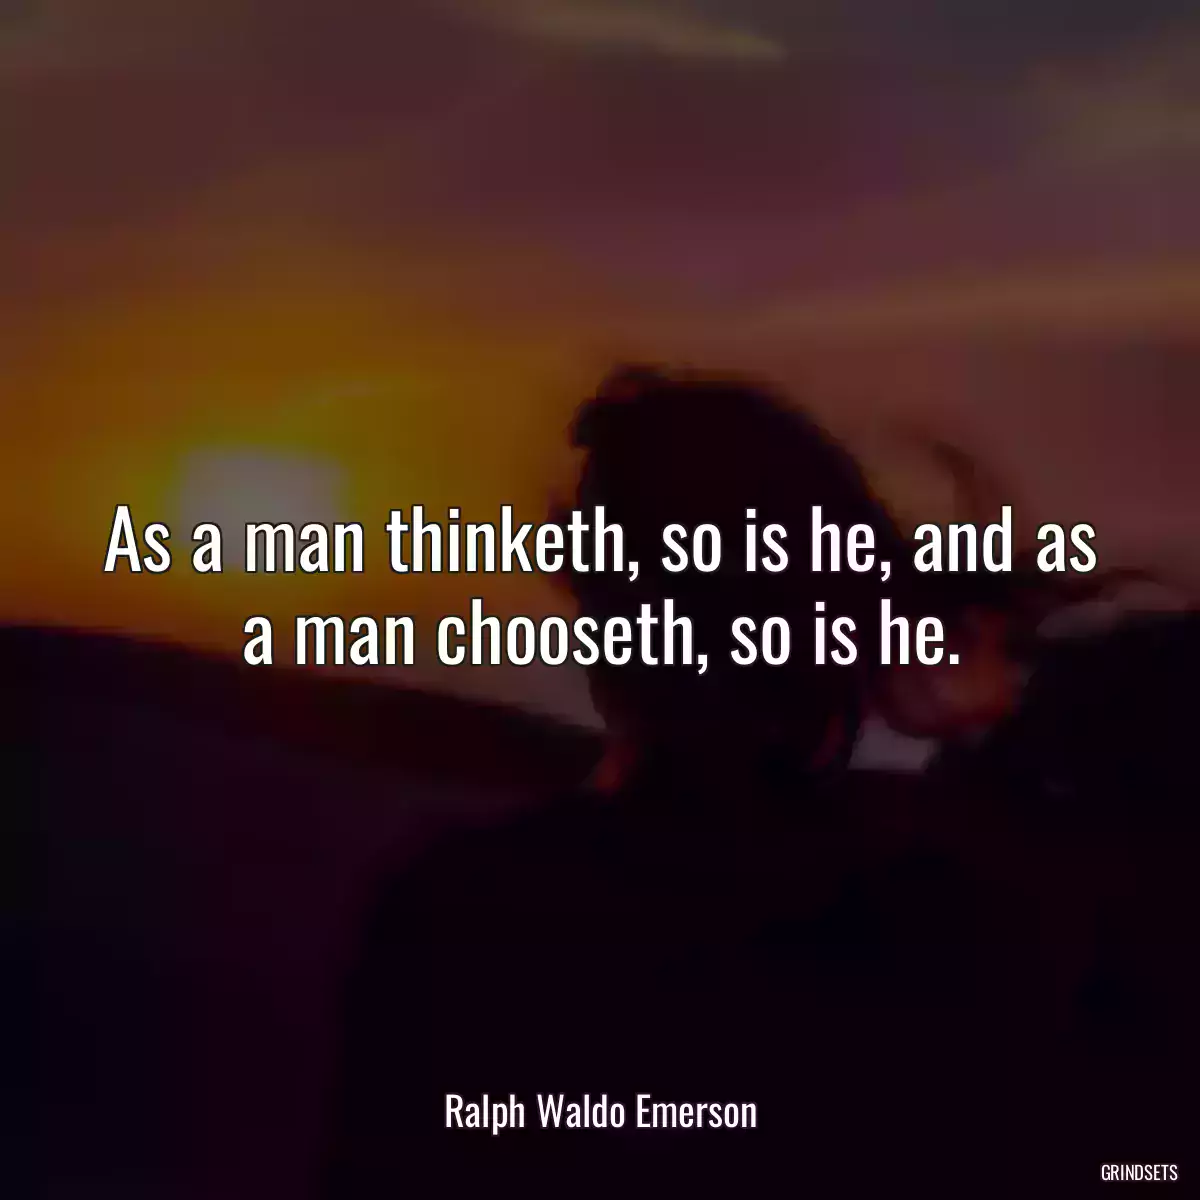 As a man thinketh, so is he, and as a man chooseth, so is he.